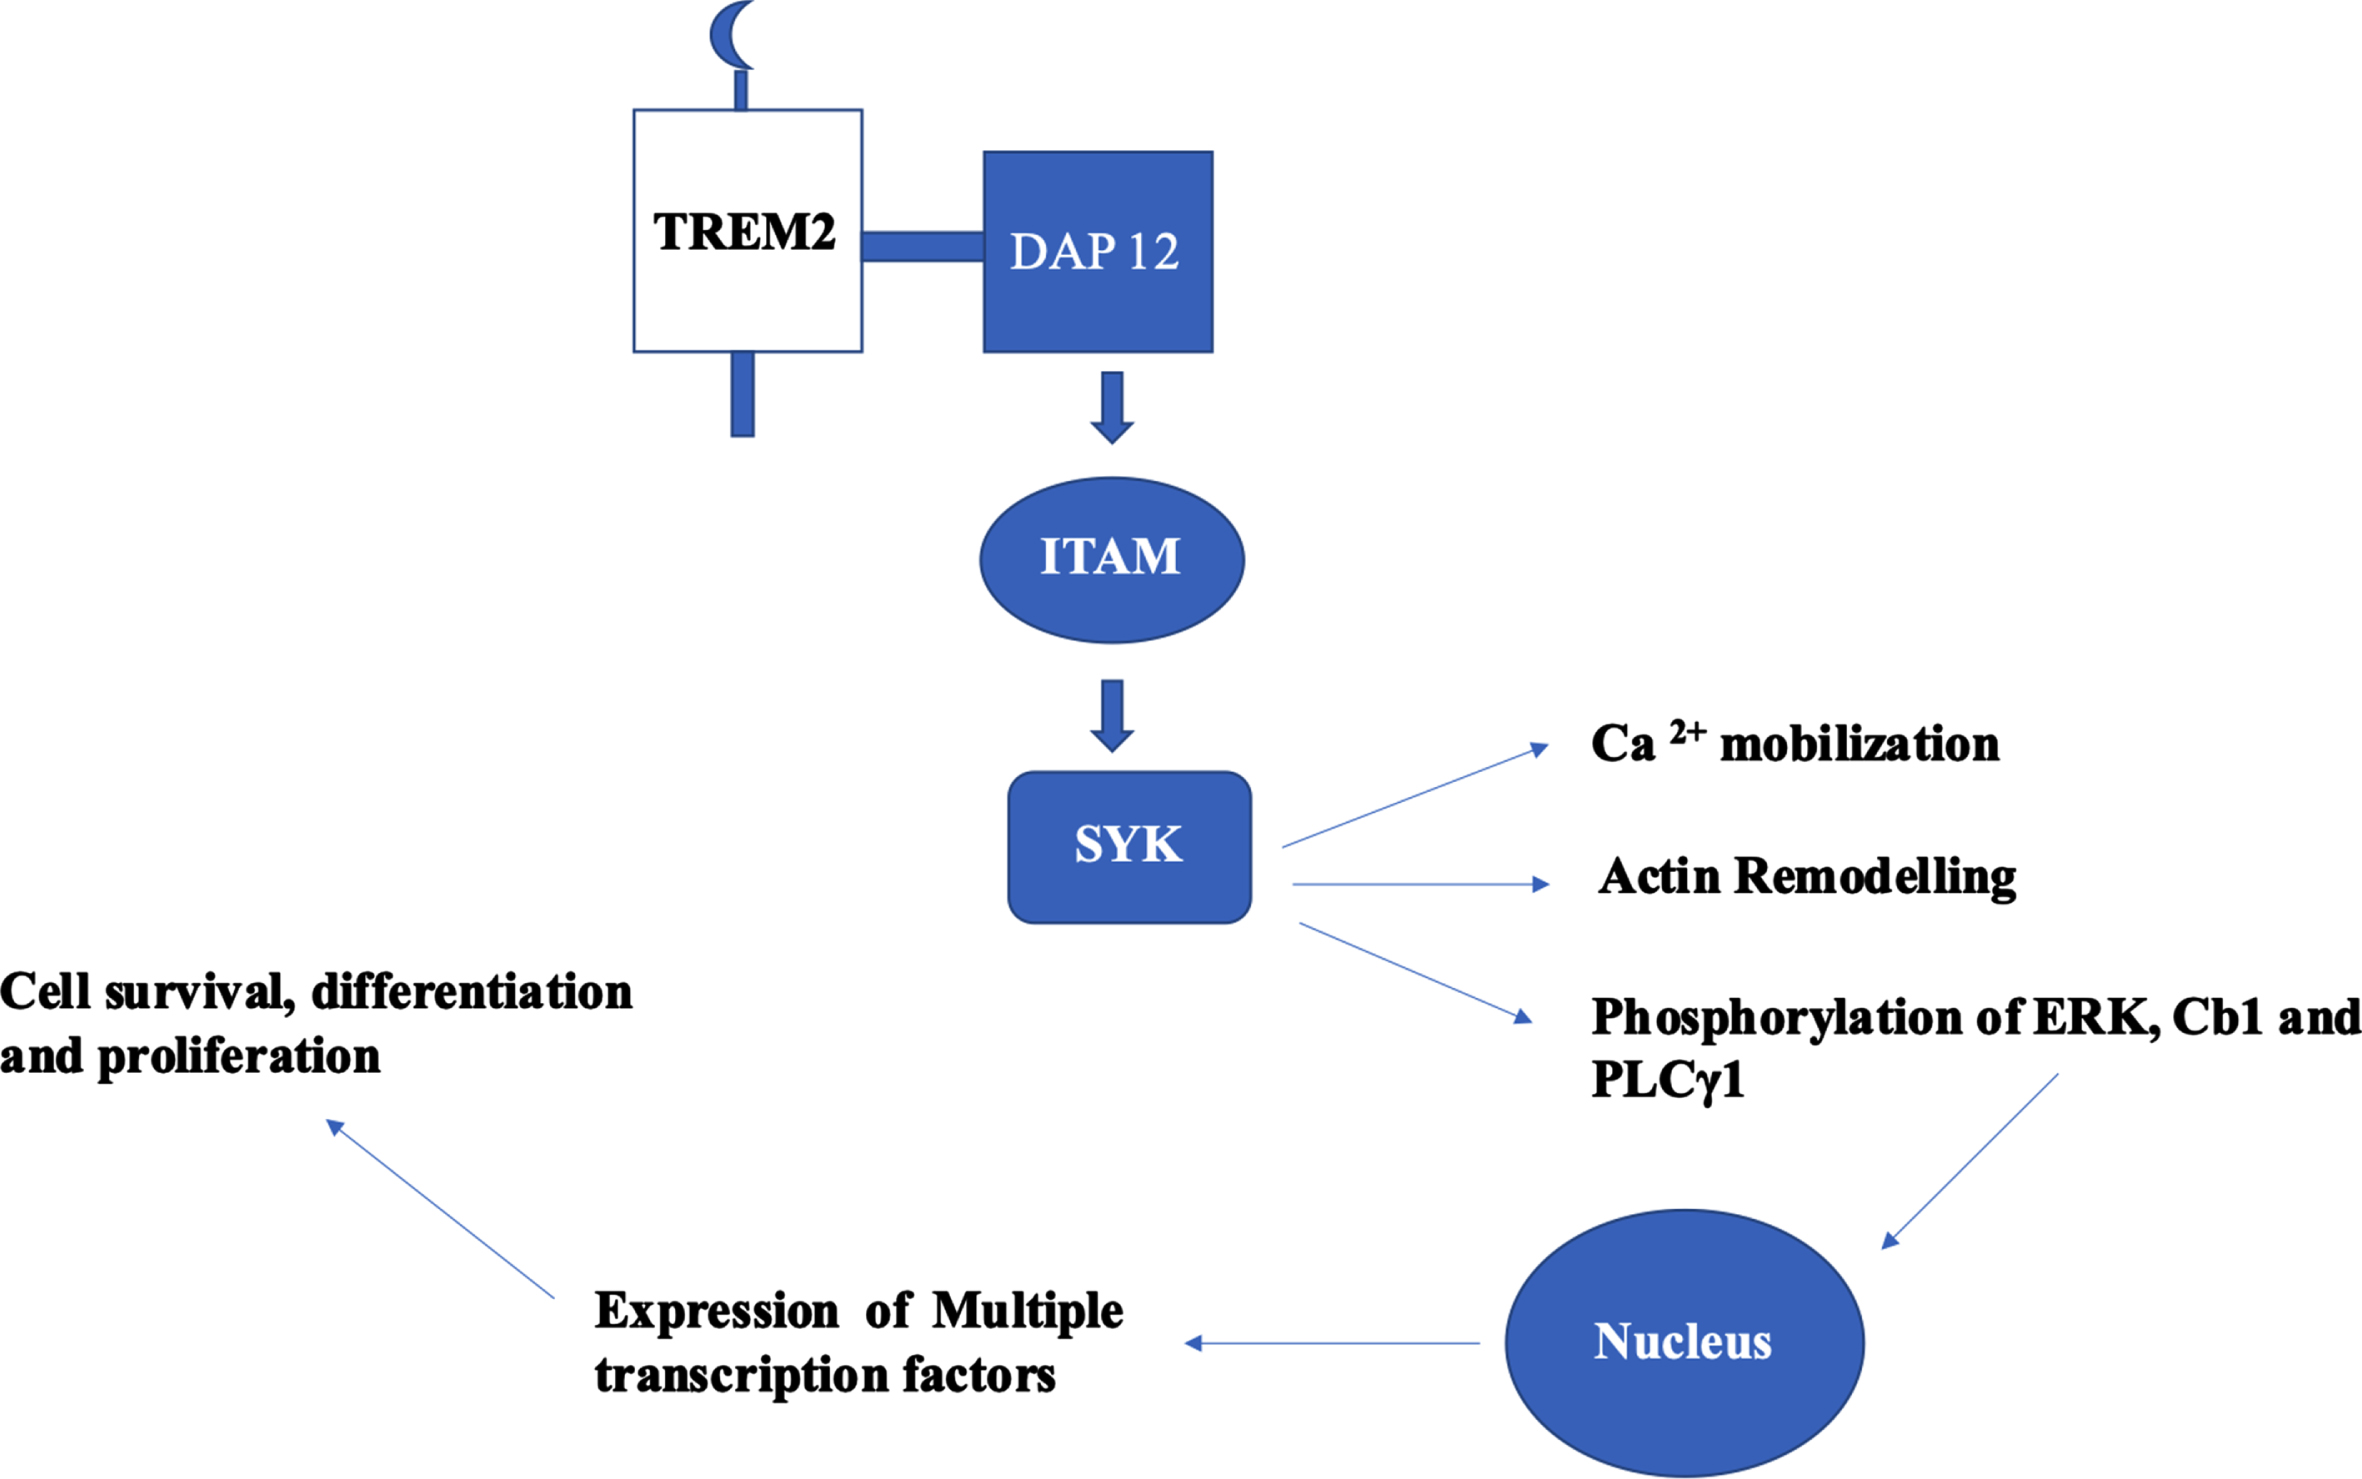 Canonical signaling pathway of TREM2–DAP12 cascade and its functional role. Phosphorylation of tyrosine residues of ITAM in DAP 12 leads to the activation of SYK which results to phosphorylation of endogenous signaling proteins: ERK 1/2, Cb1, and PLCγ1. These proteins translocate to nucleus and initiates the expression of multiple transcription factors which had implications in cell survival, differentiation, and proliferation.